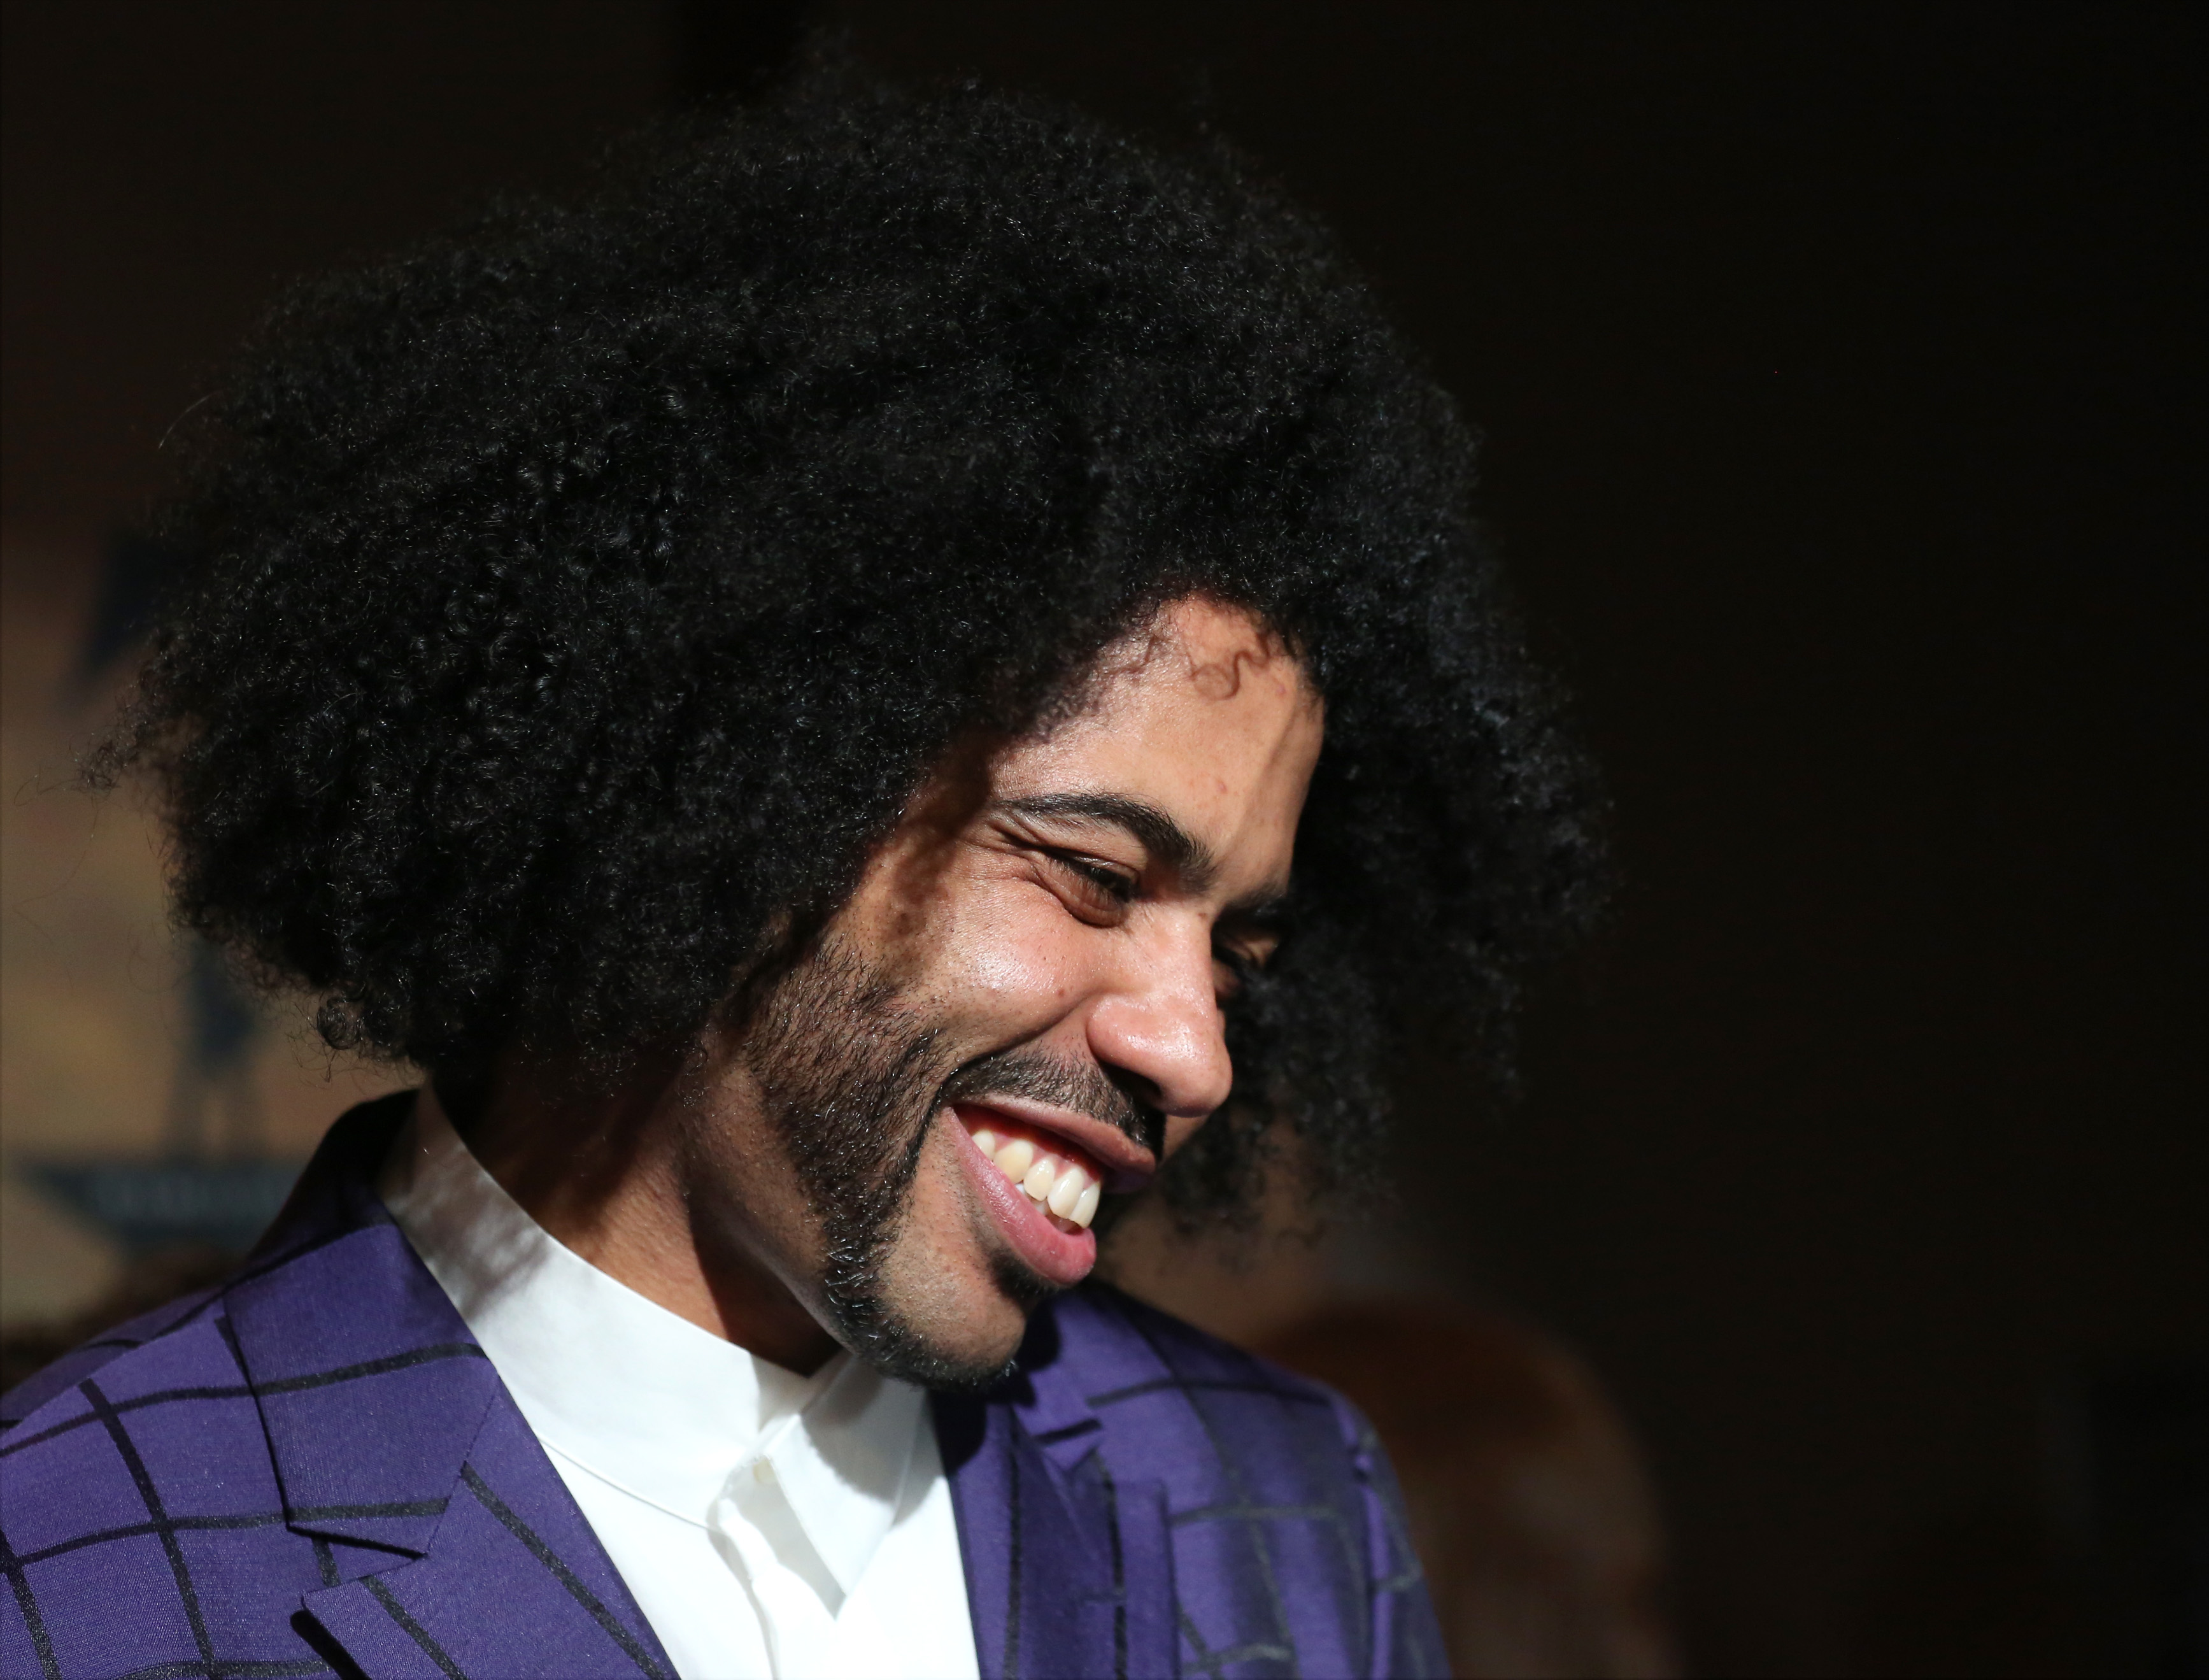 Daveed Diggs attends the 'Hamilton' Broadway Opening Night in New York City, on August 6, 2015. (Walter McBride—Getty Images)